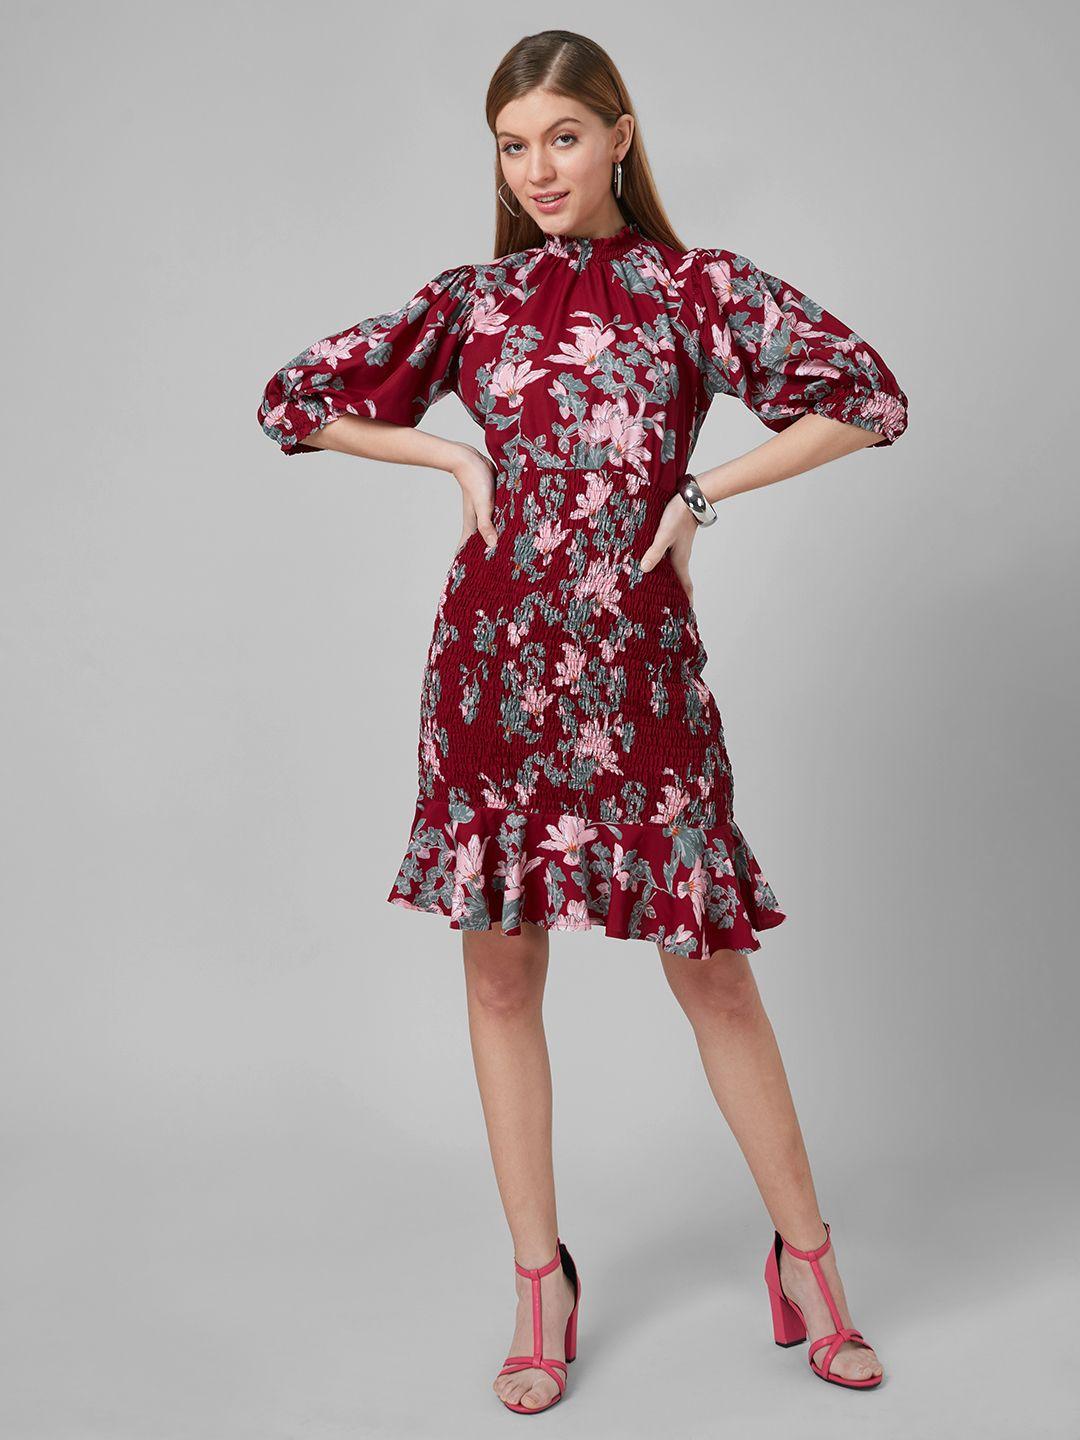 style quotient floral printed bodycon smart casual dress